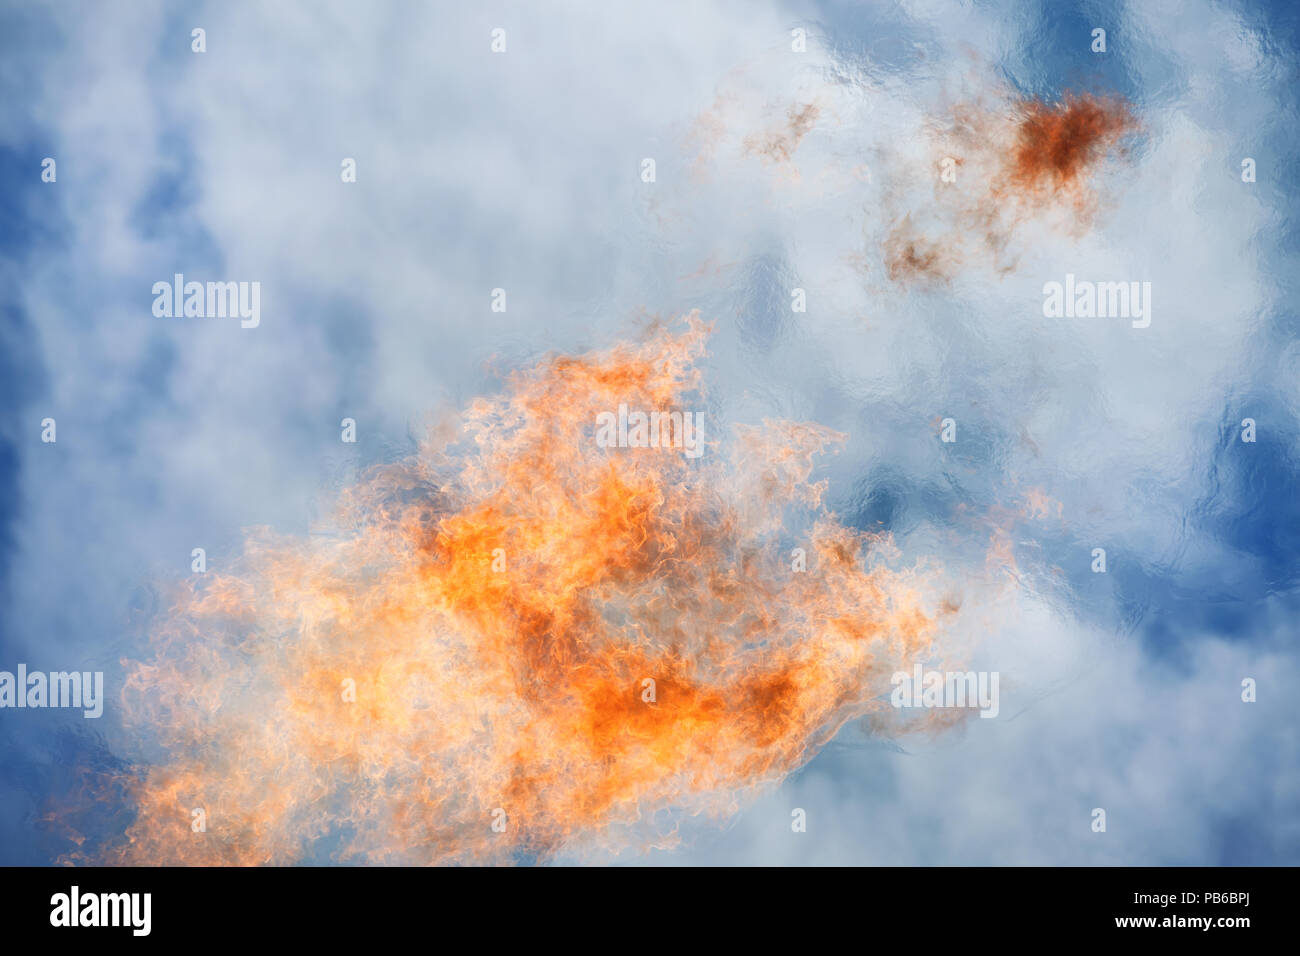 Bright big flame against blue sky. Fire and burning theme Stock Photo